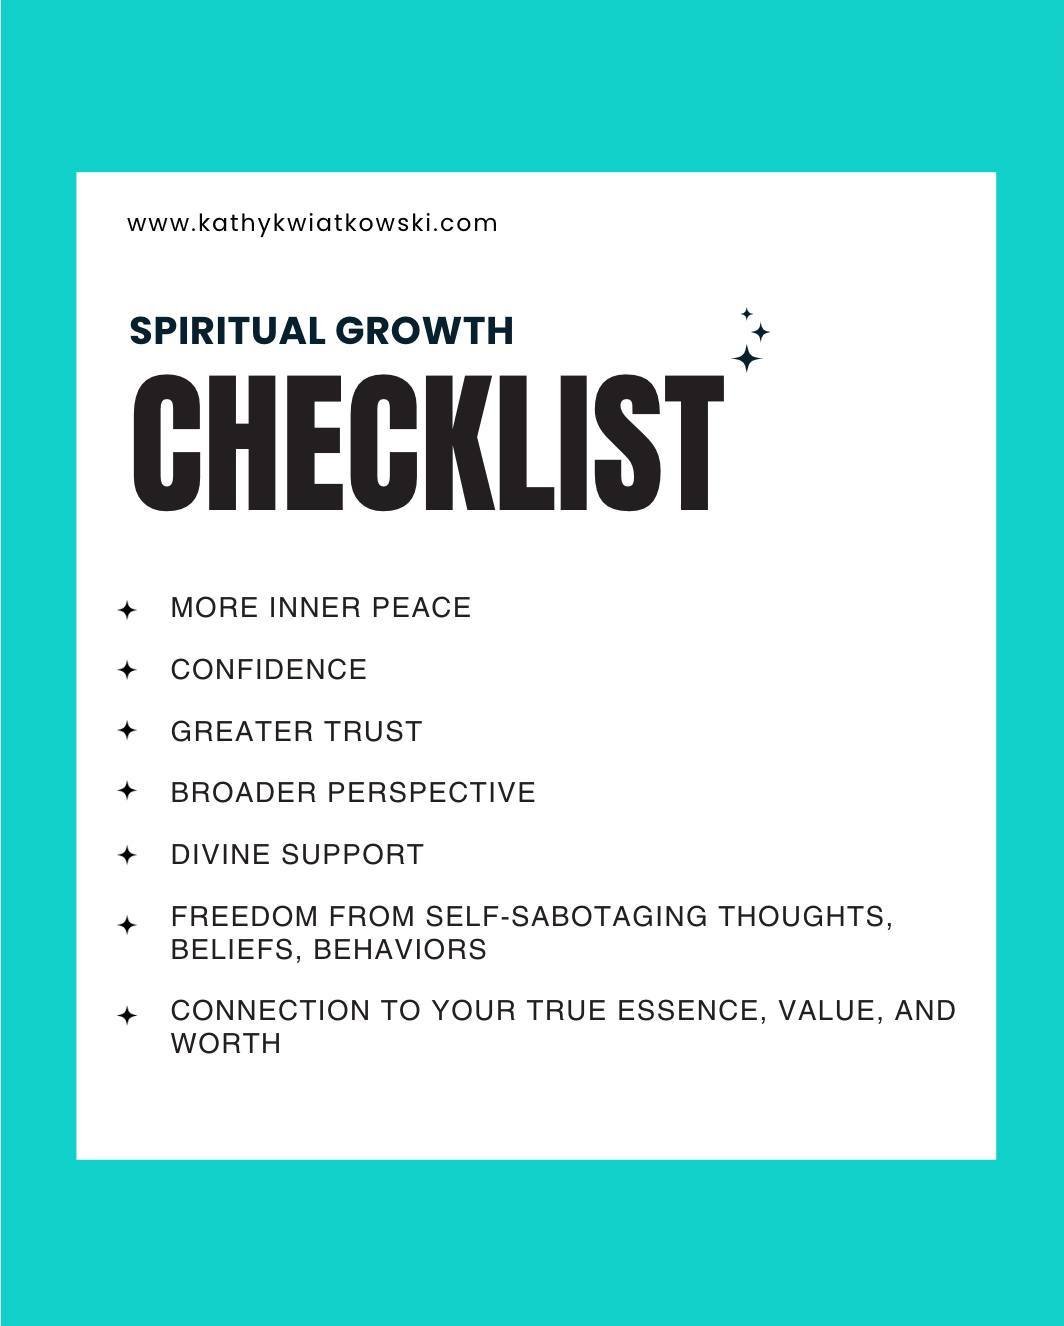 A checklist for you during your spiritual growth journey: 

🌟More inner peace
🌟More confidence
🌟Greater trust
🌟Broader perspective
🌟Divine support
🌟Freedom from false beliefs 
🌟Greater connection to your true essence
.
.
.
.
#onlinelearning #f